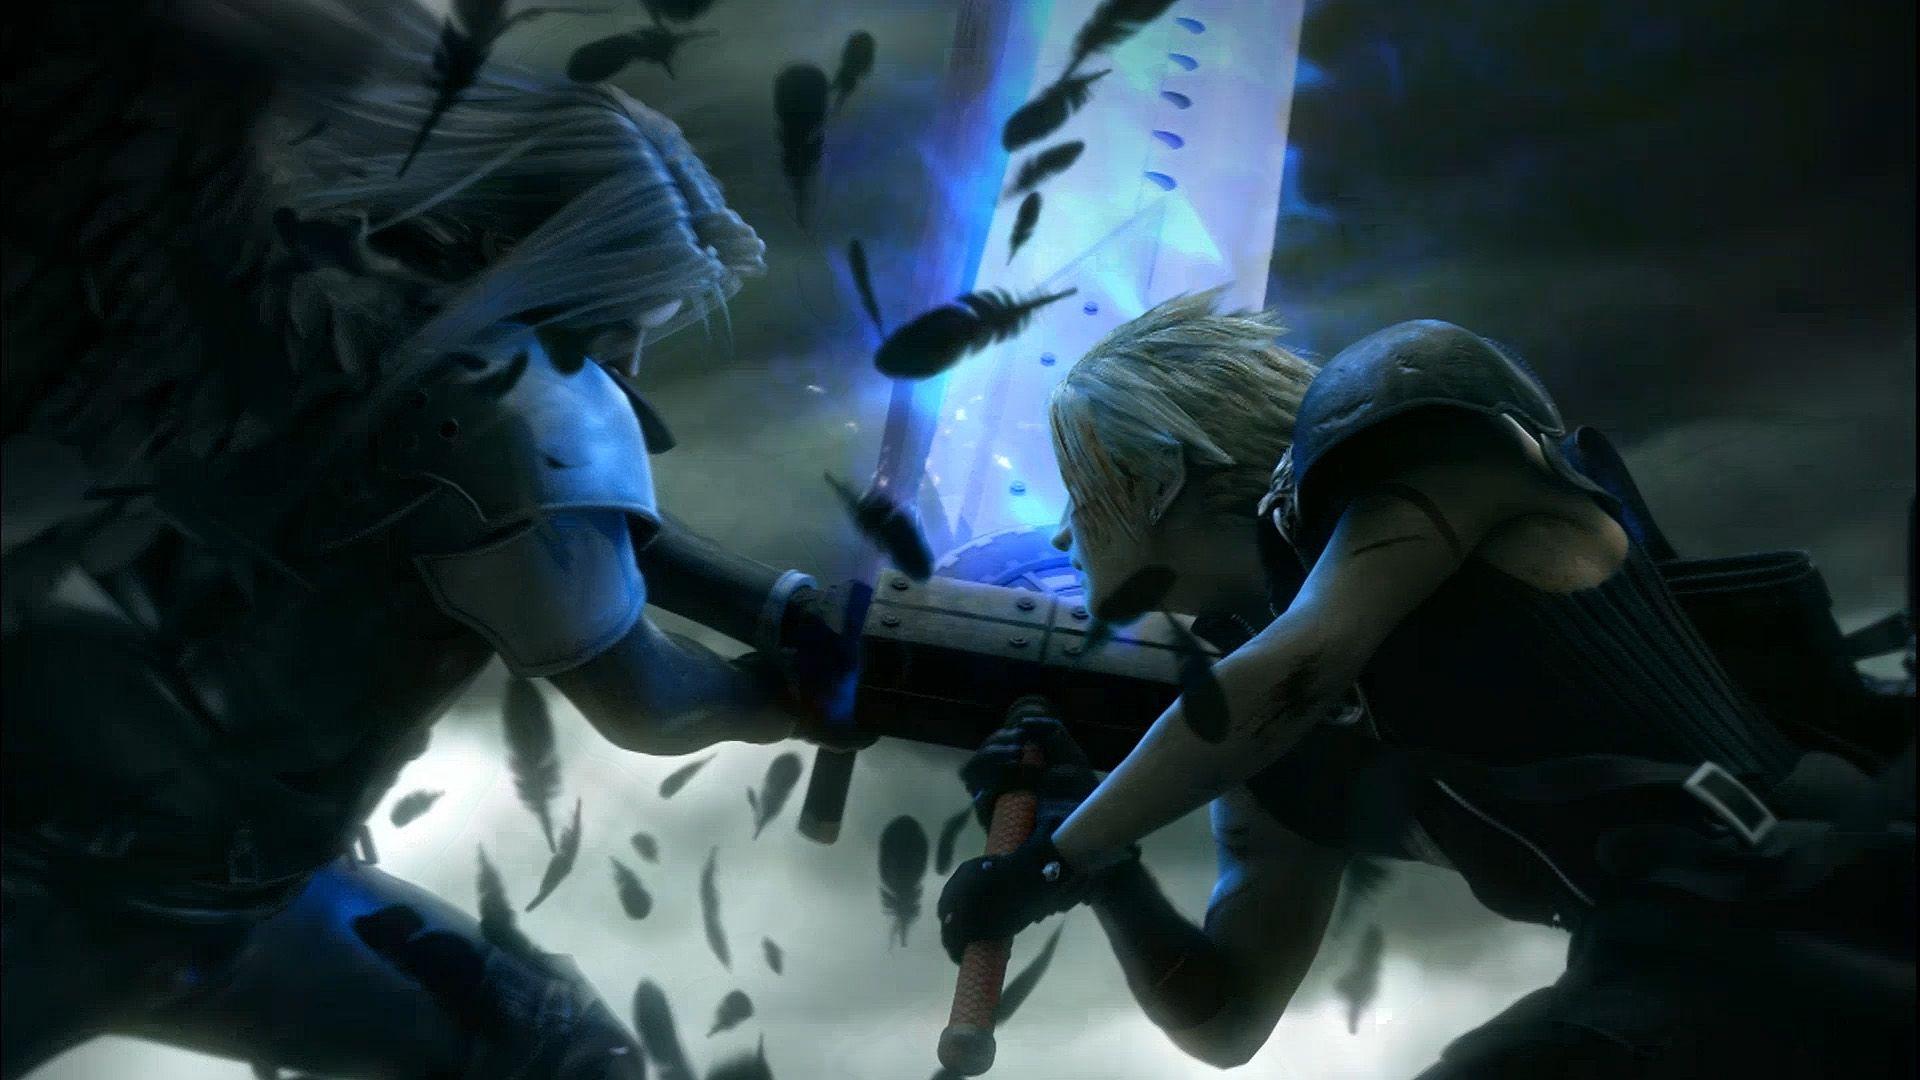 Final Fantasy VII: Advent Children Full HD Wallpapers and Backgrounds.